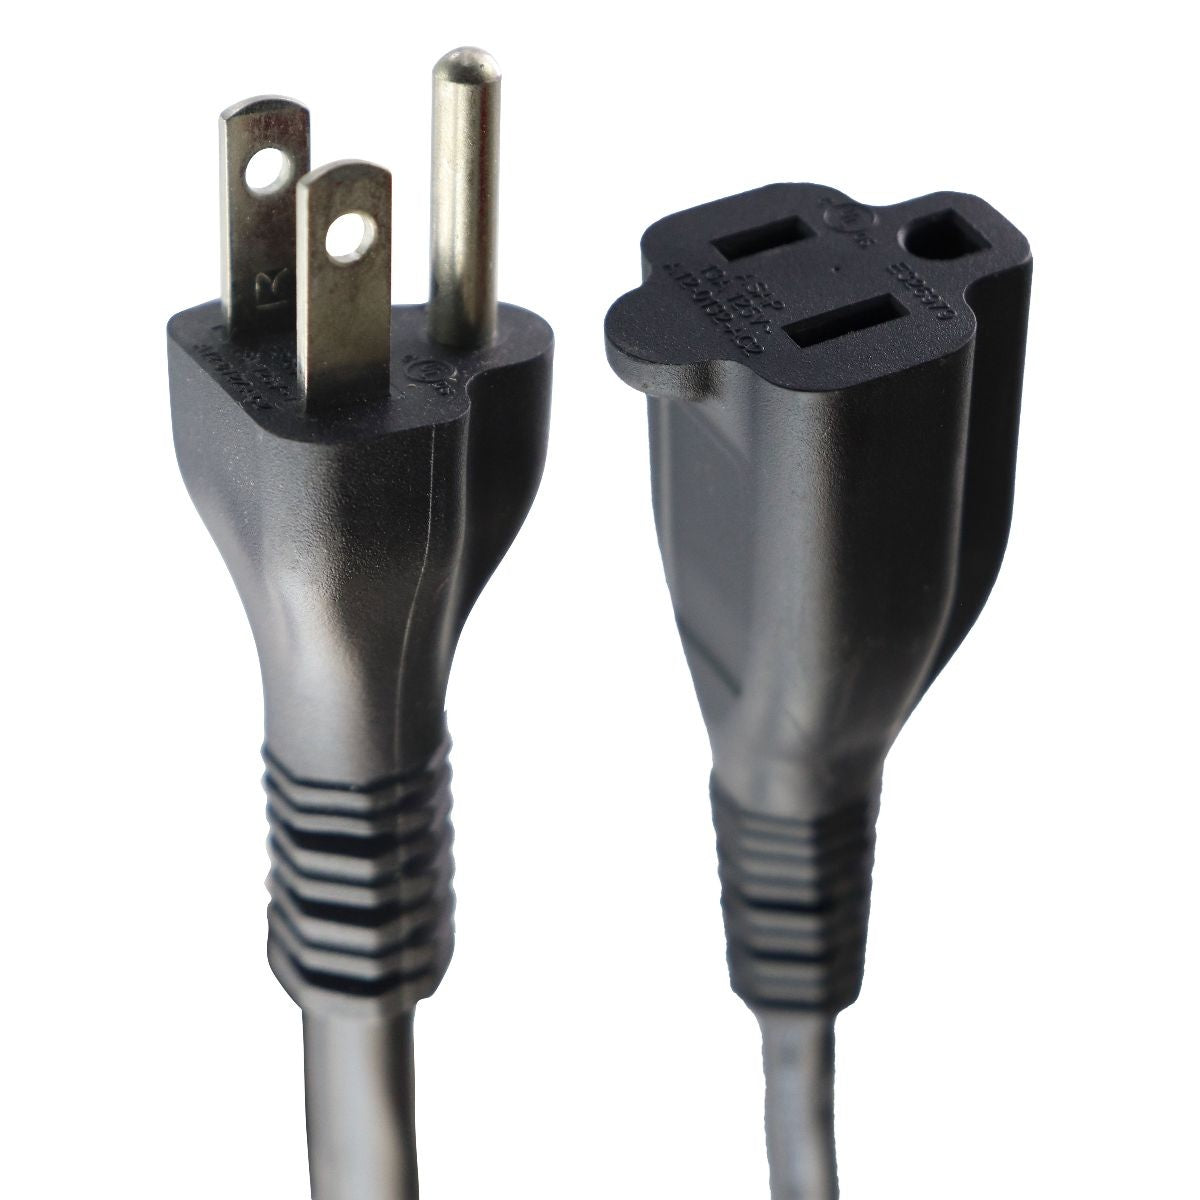 ASAP (15-Ft) 13A/125V Grounded Wall Plug Extension Cable Black A12-0132/27-AC2 Multipurpose Batteries & Power - Multipurpose AC to DC Adapters ASAP    - Simple Cell Bulk Wholesale Pricing - USA Seller